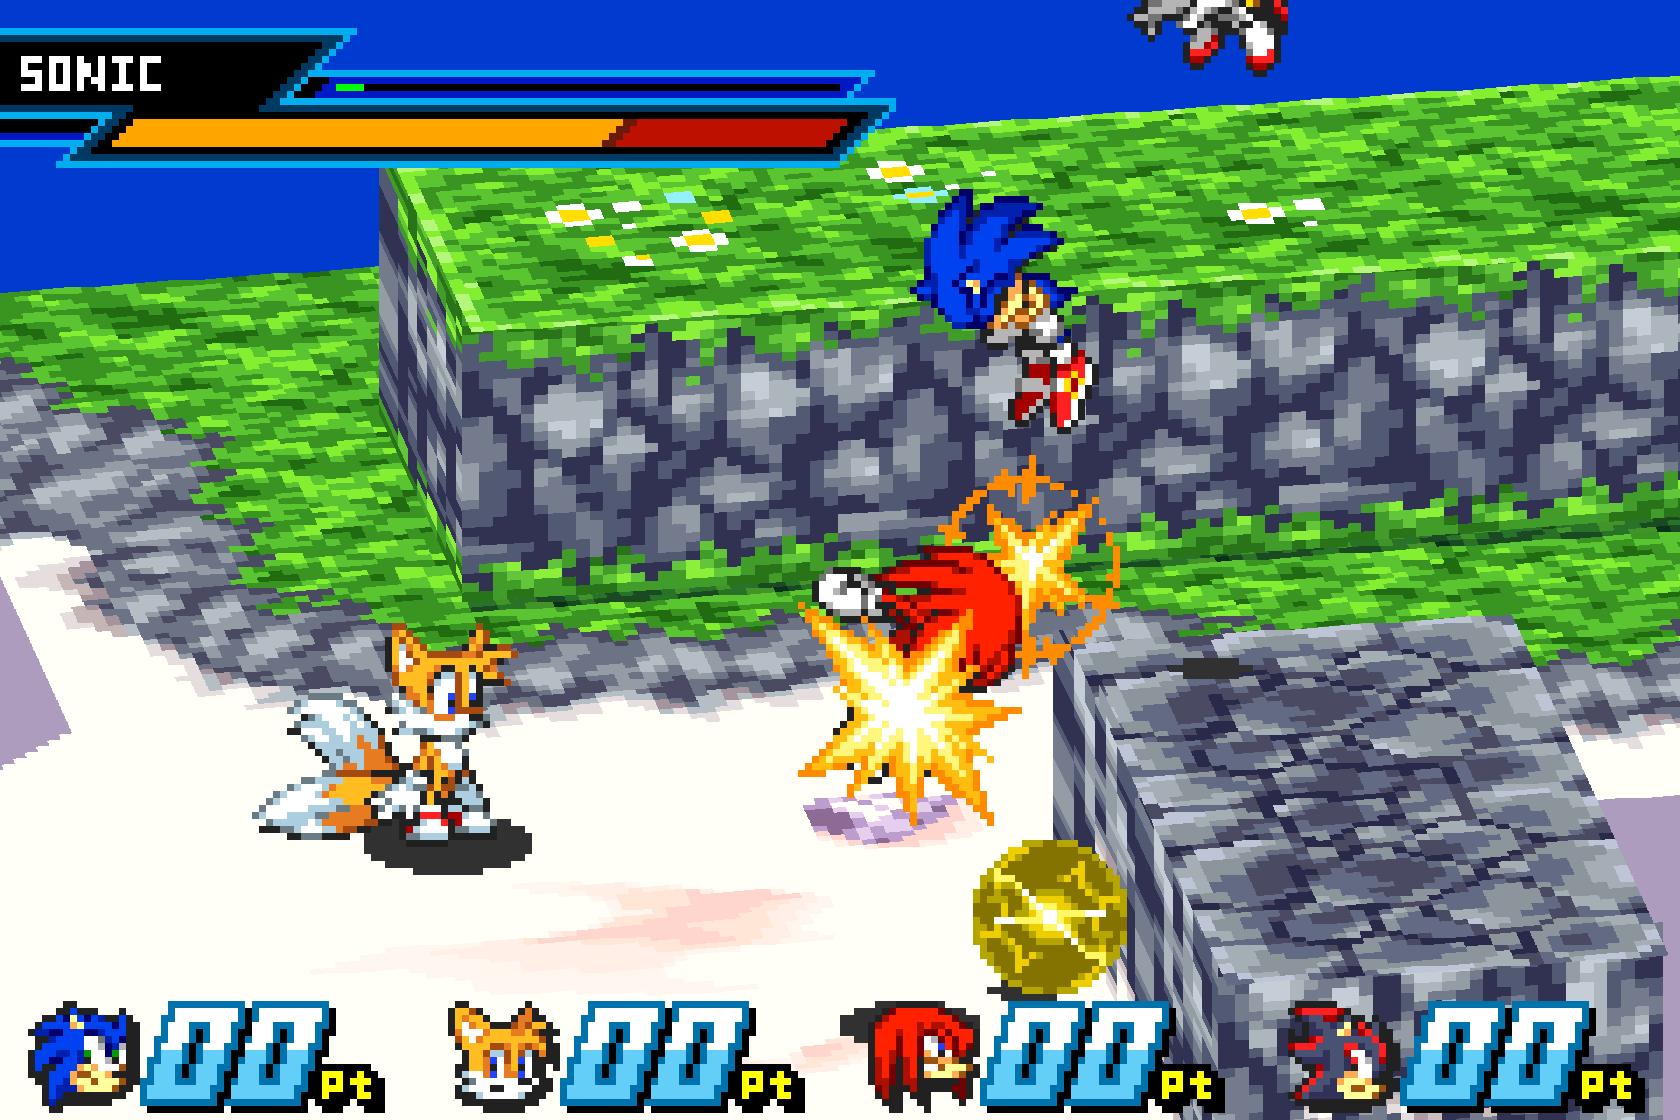 Sonic Battle uses affine sprites to create the arena